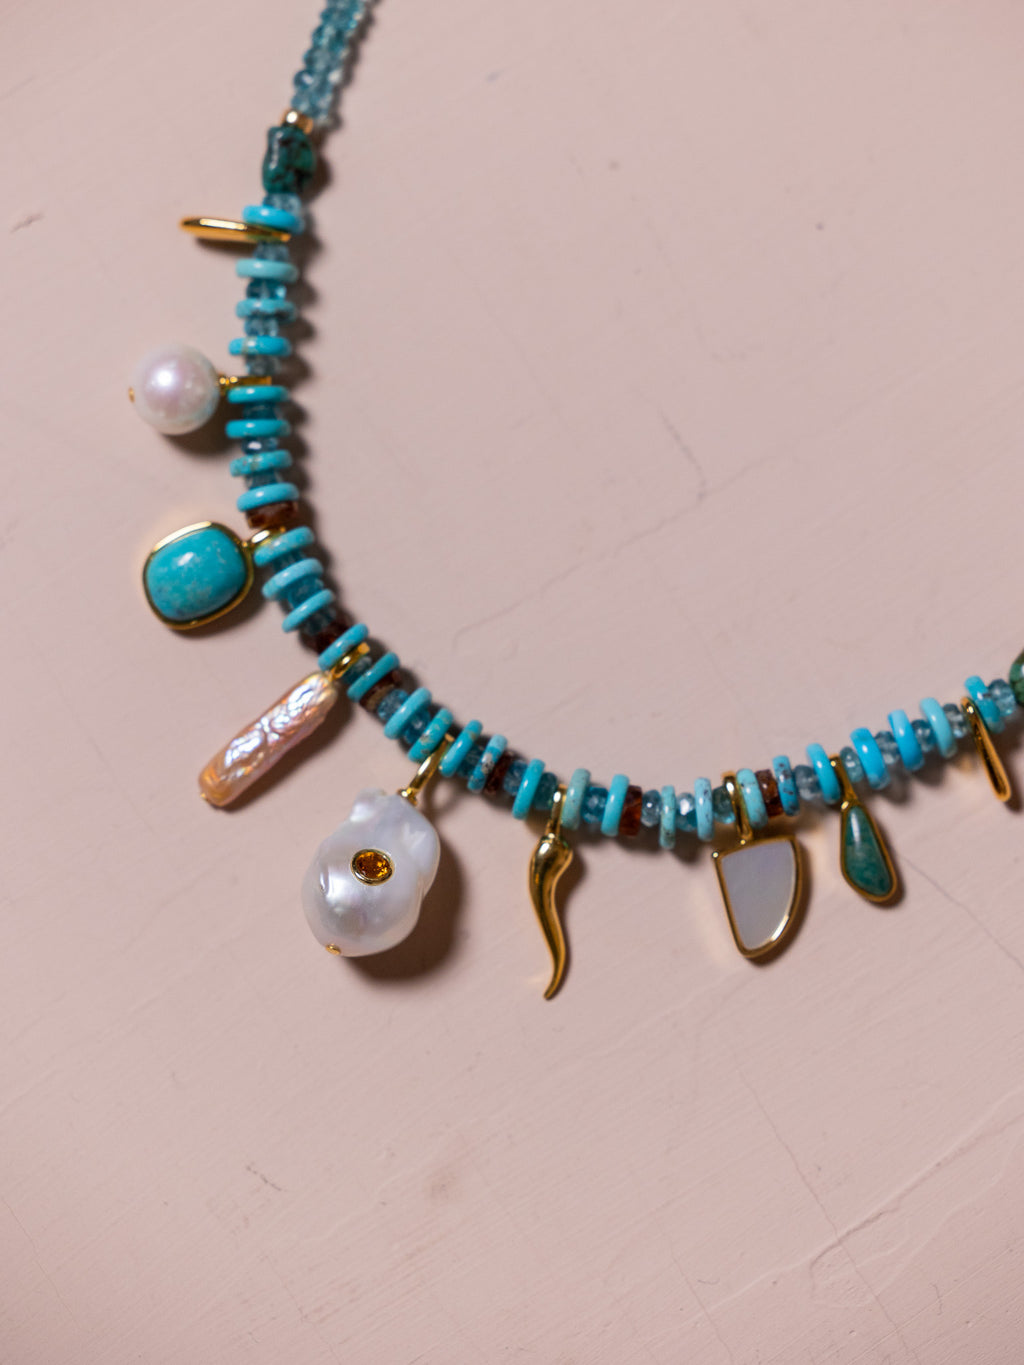 Necklace with blue beads and other charms against pink background.